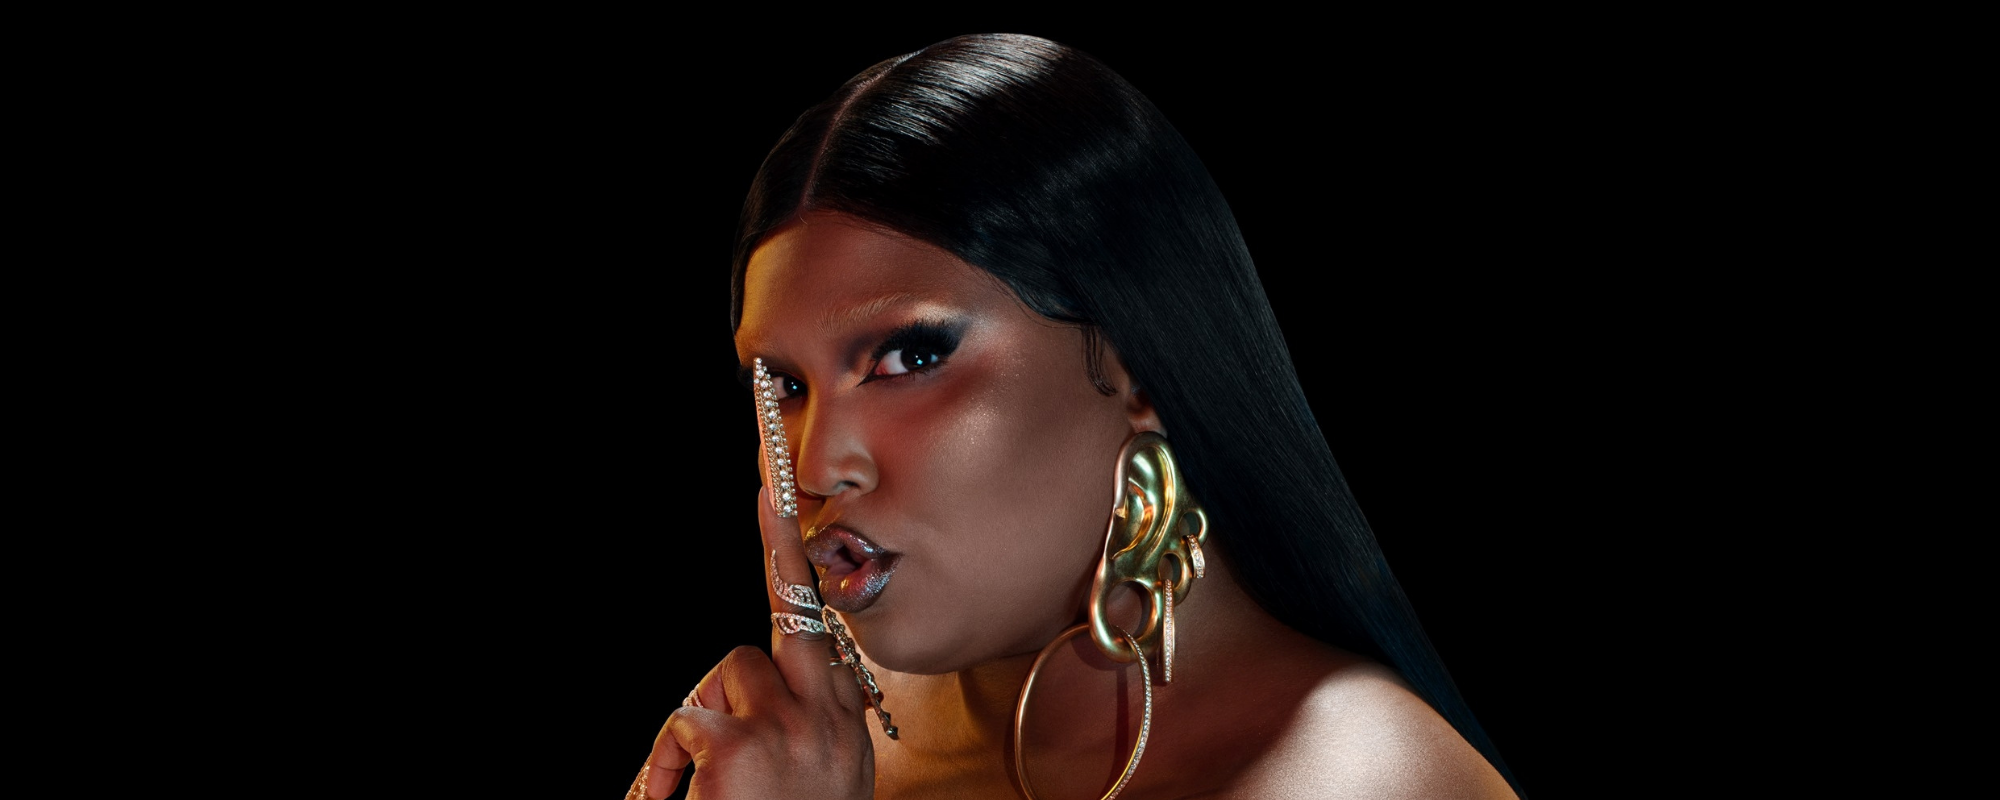 Lizzo to Release First New Song In Two Years “Rumors” Next Week